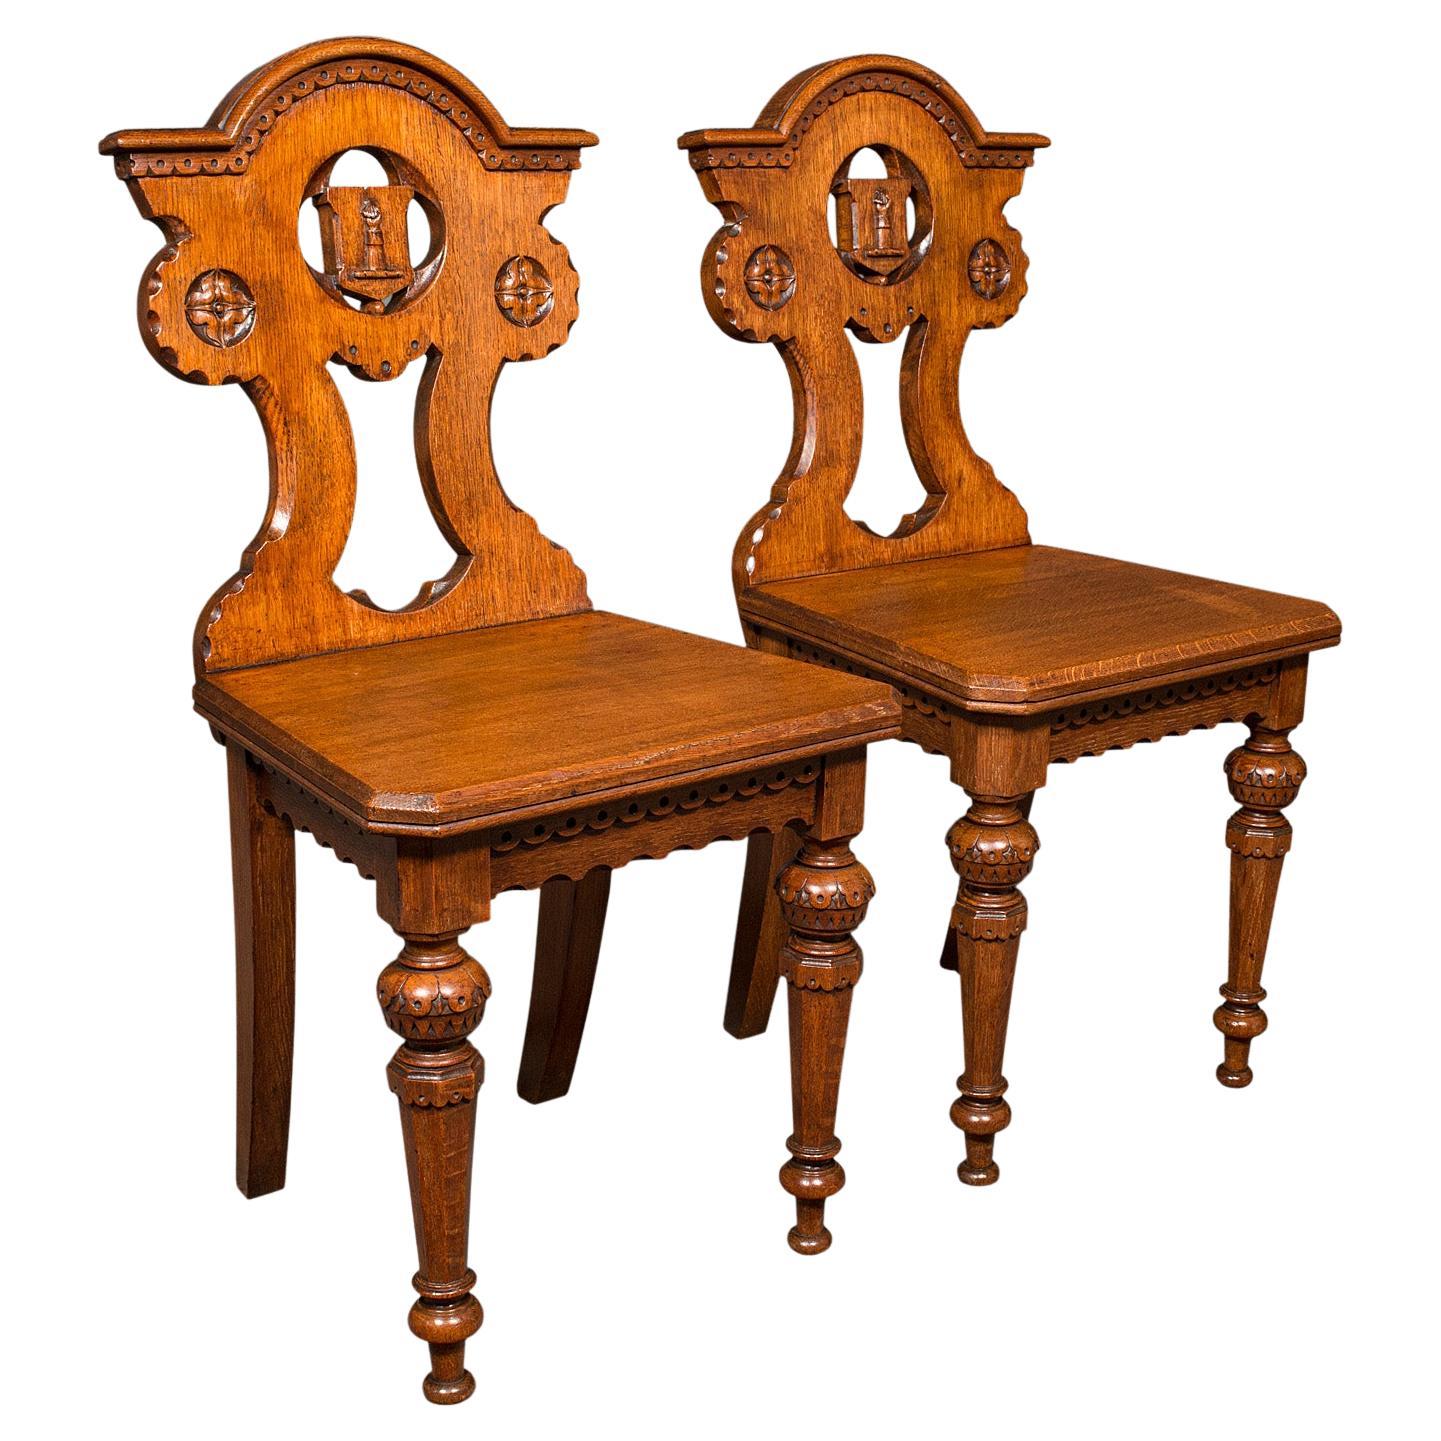 Pair Of Antique Hall Chairs, Scottish, Oak, Seat, Arts & Crafts Taste, Victorian For Sale